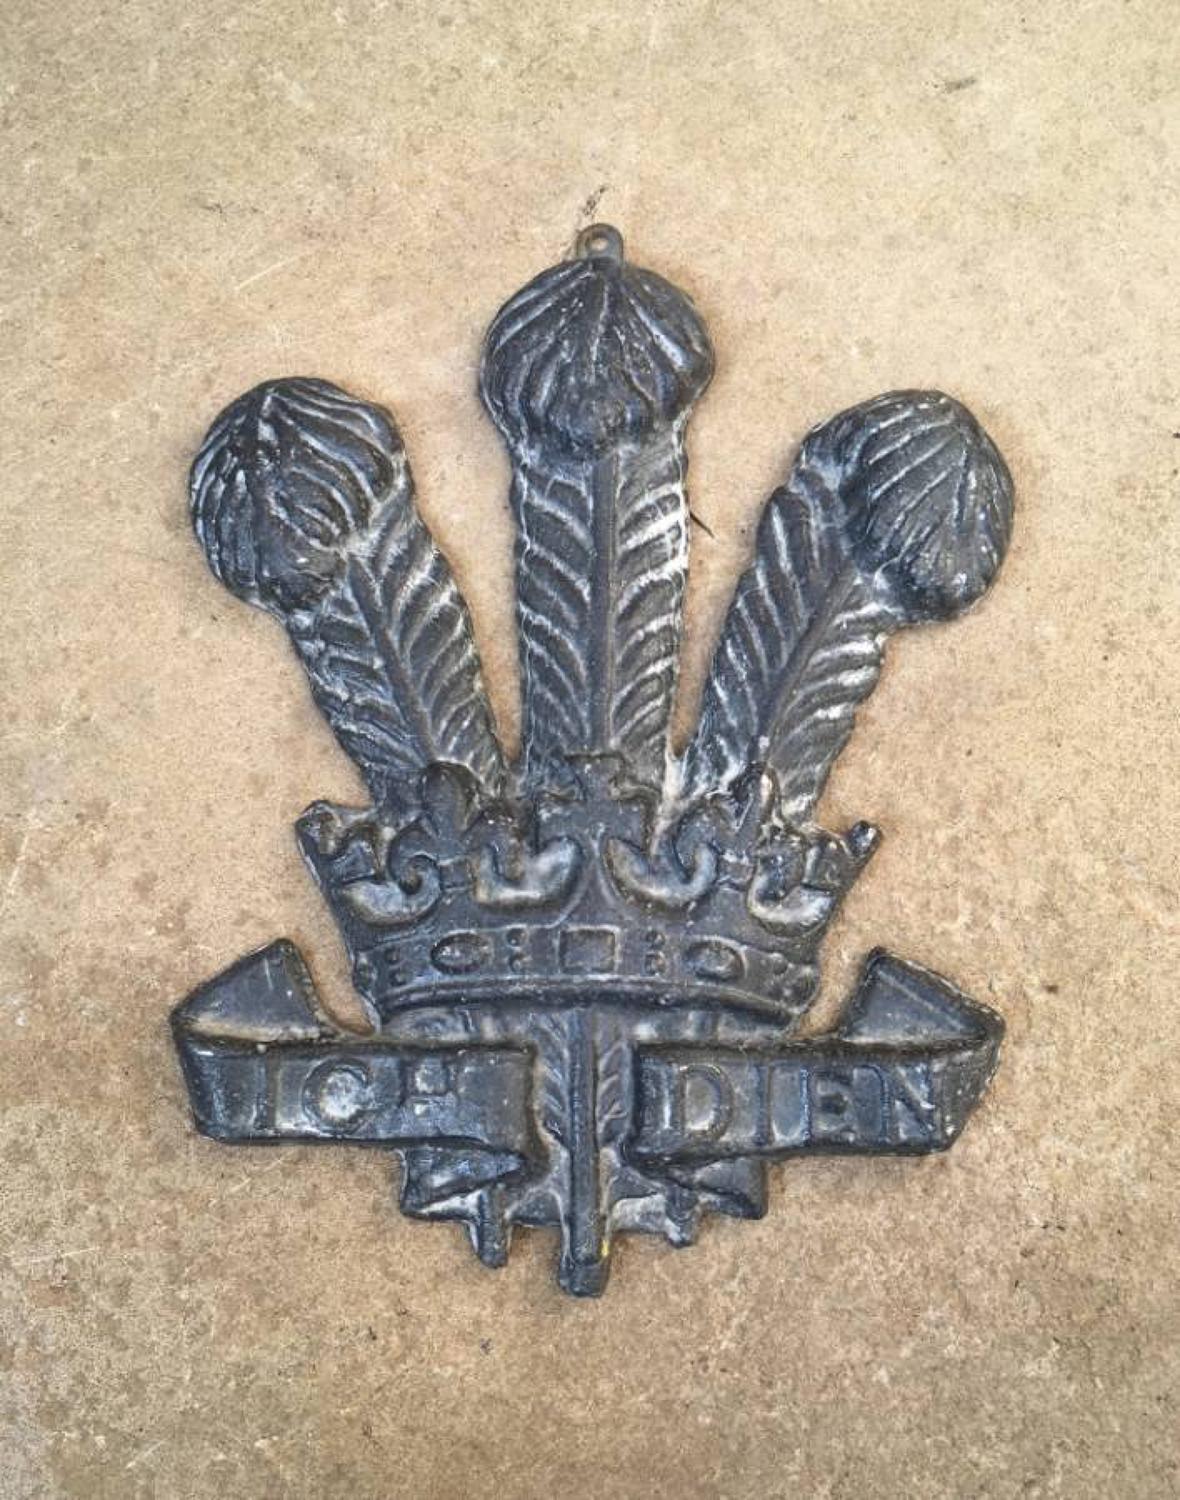 Early 20th Century Lead Prince of Wales Plaque - By Royal Appointment